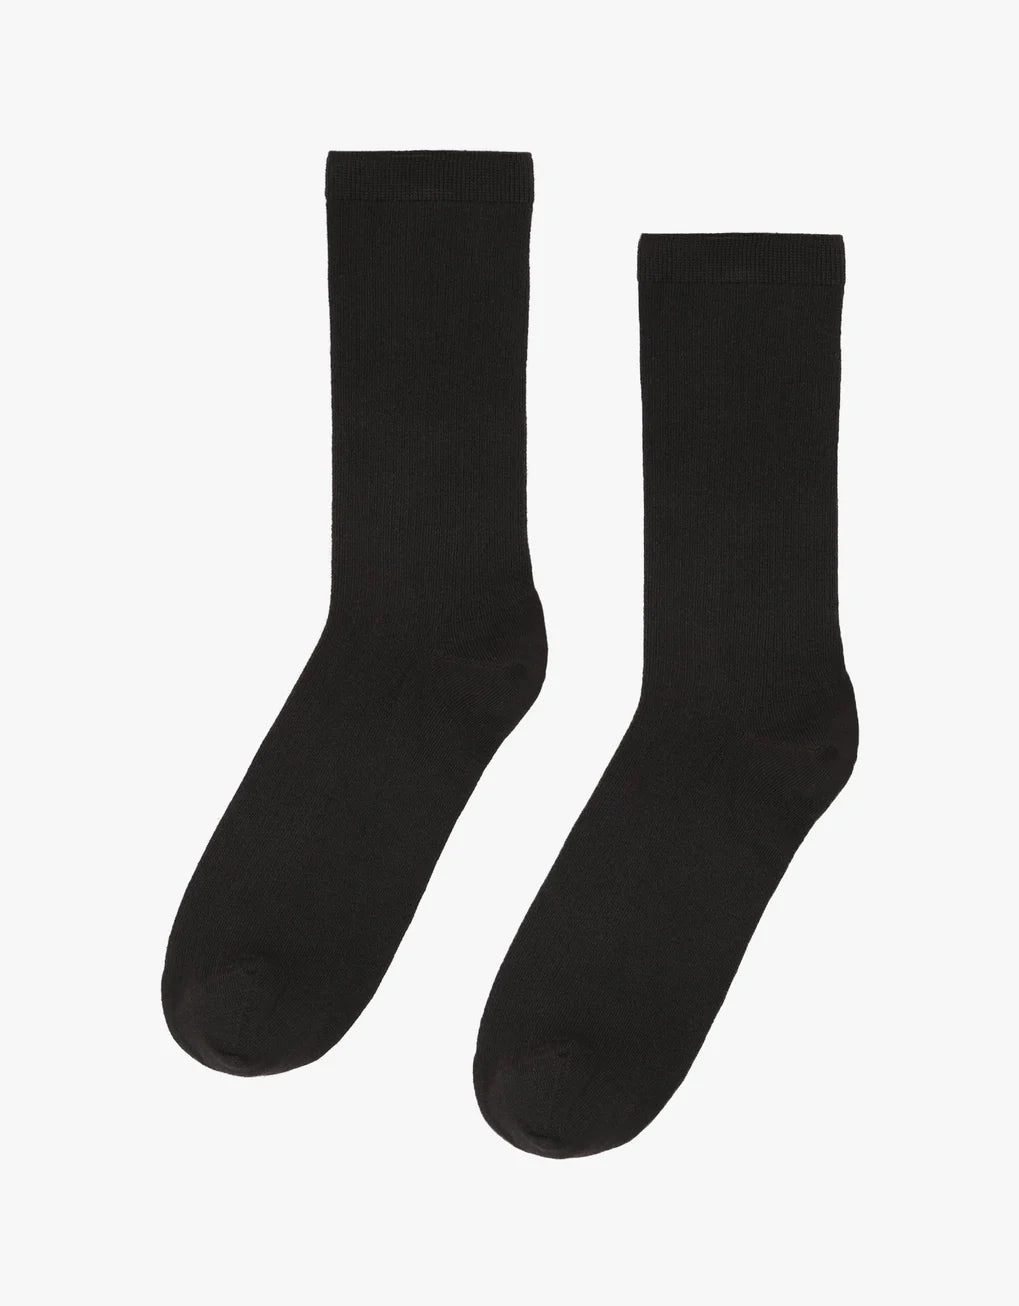 A pair of Colorful Standard Classic Organic Socks made from organic cotton, on a white background.